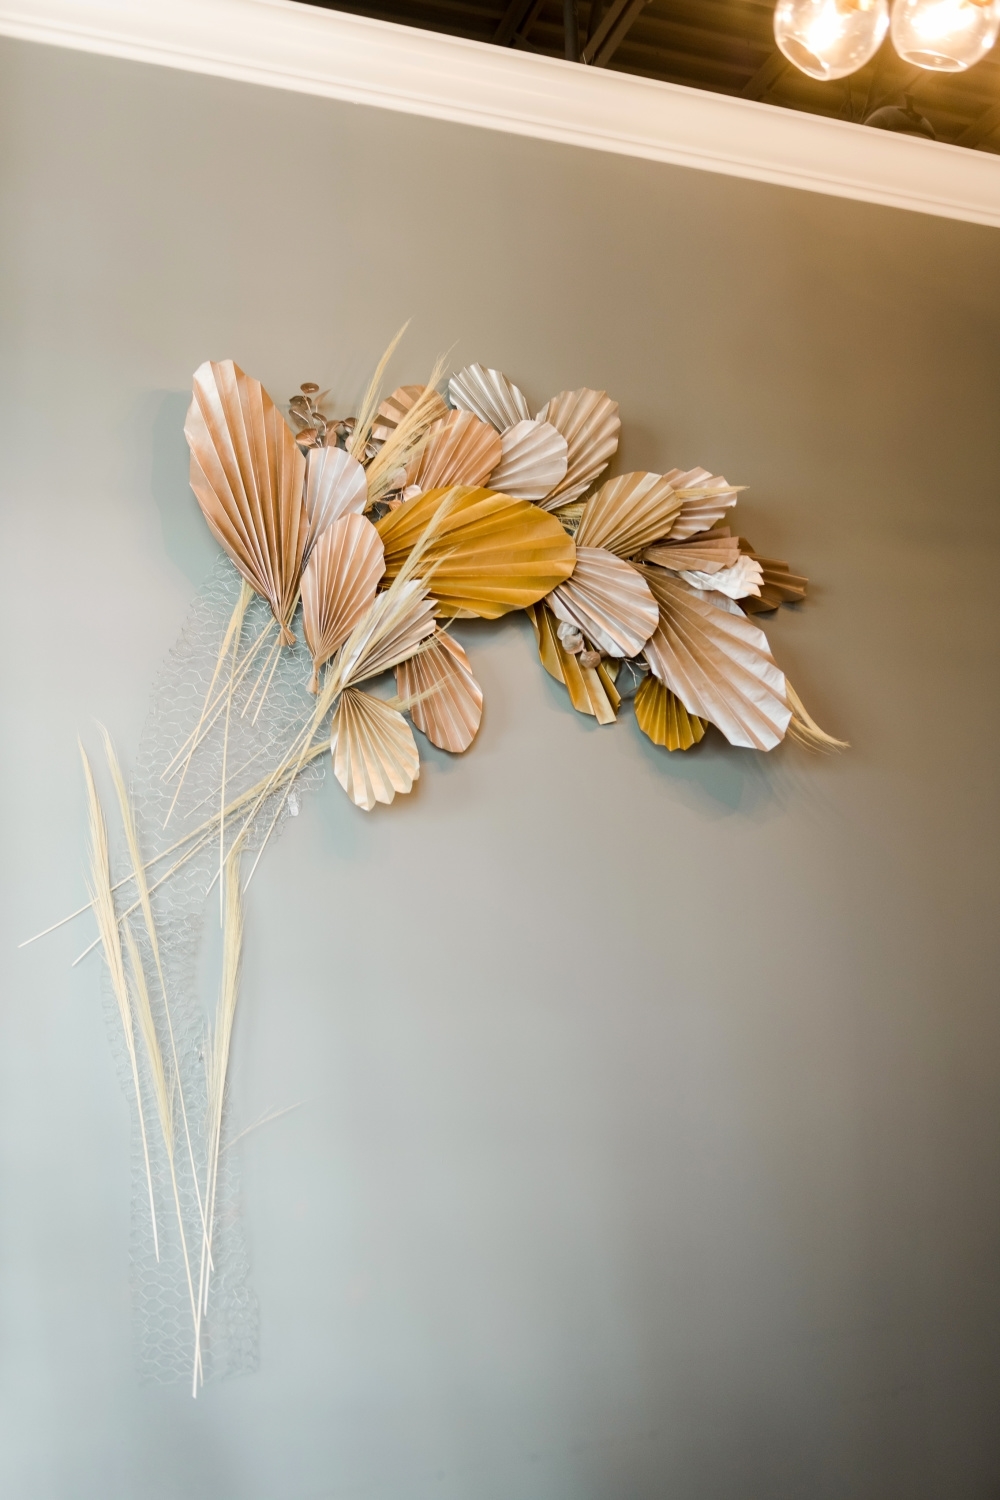 Assemble floral wall art onto wire structure